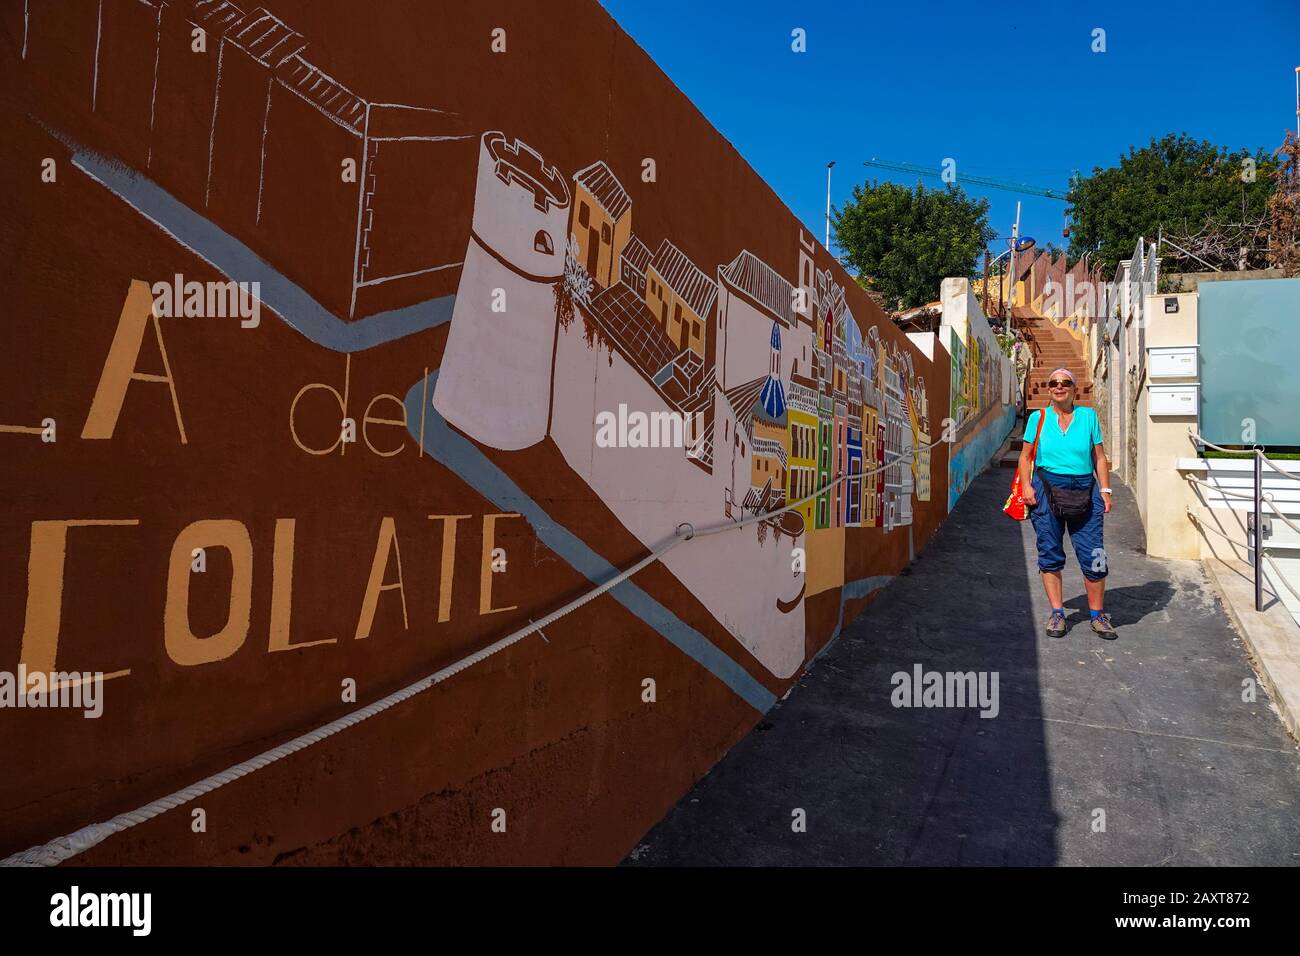 City of chocolate painted mural on a wall at the popular tourist destination of Villajoyosa, Costa Blanca, Spain Stock Photo